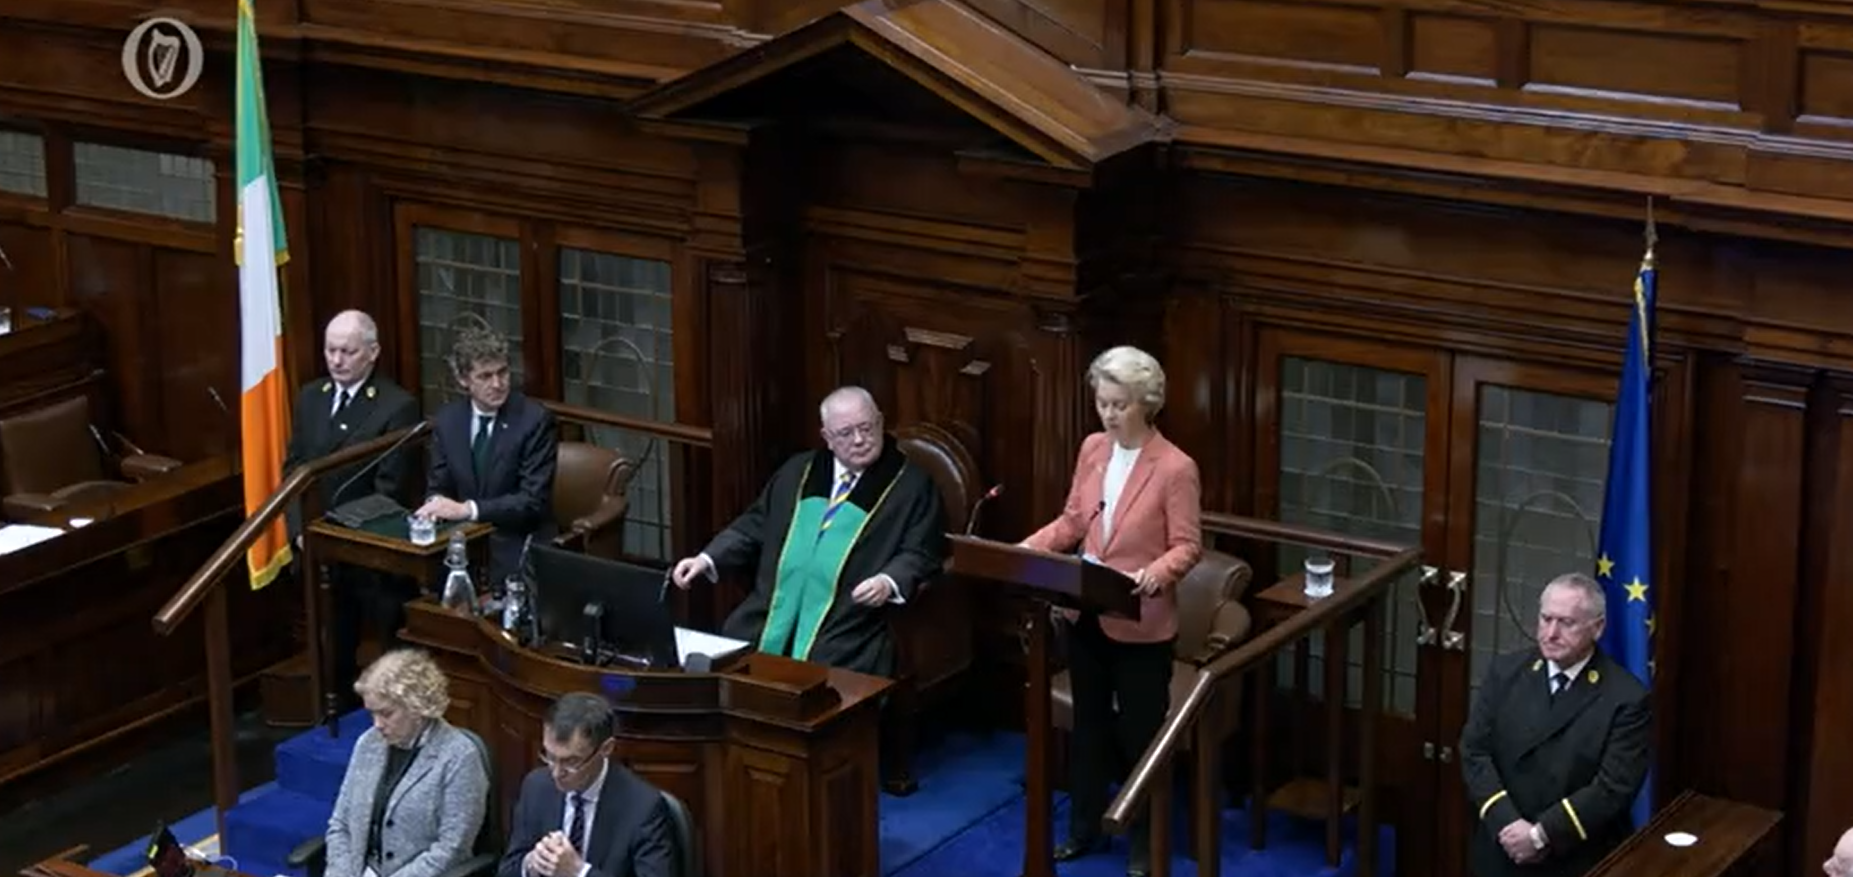 European Commission President Ursula von der Leyen addresses the Joint Houses of the Oireachtas in the Dáil chamber